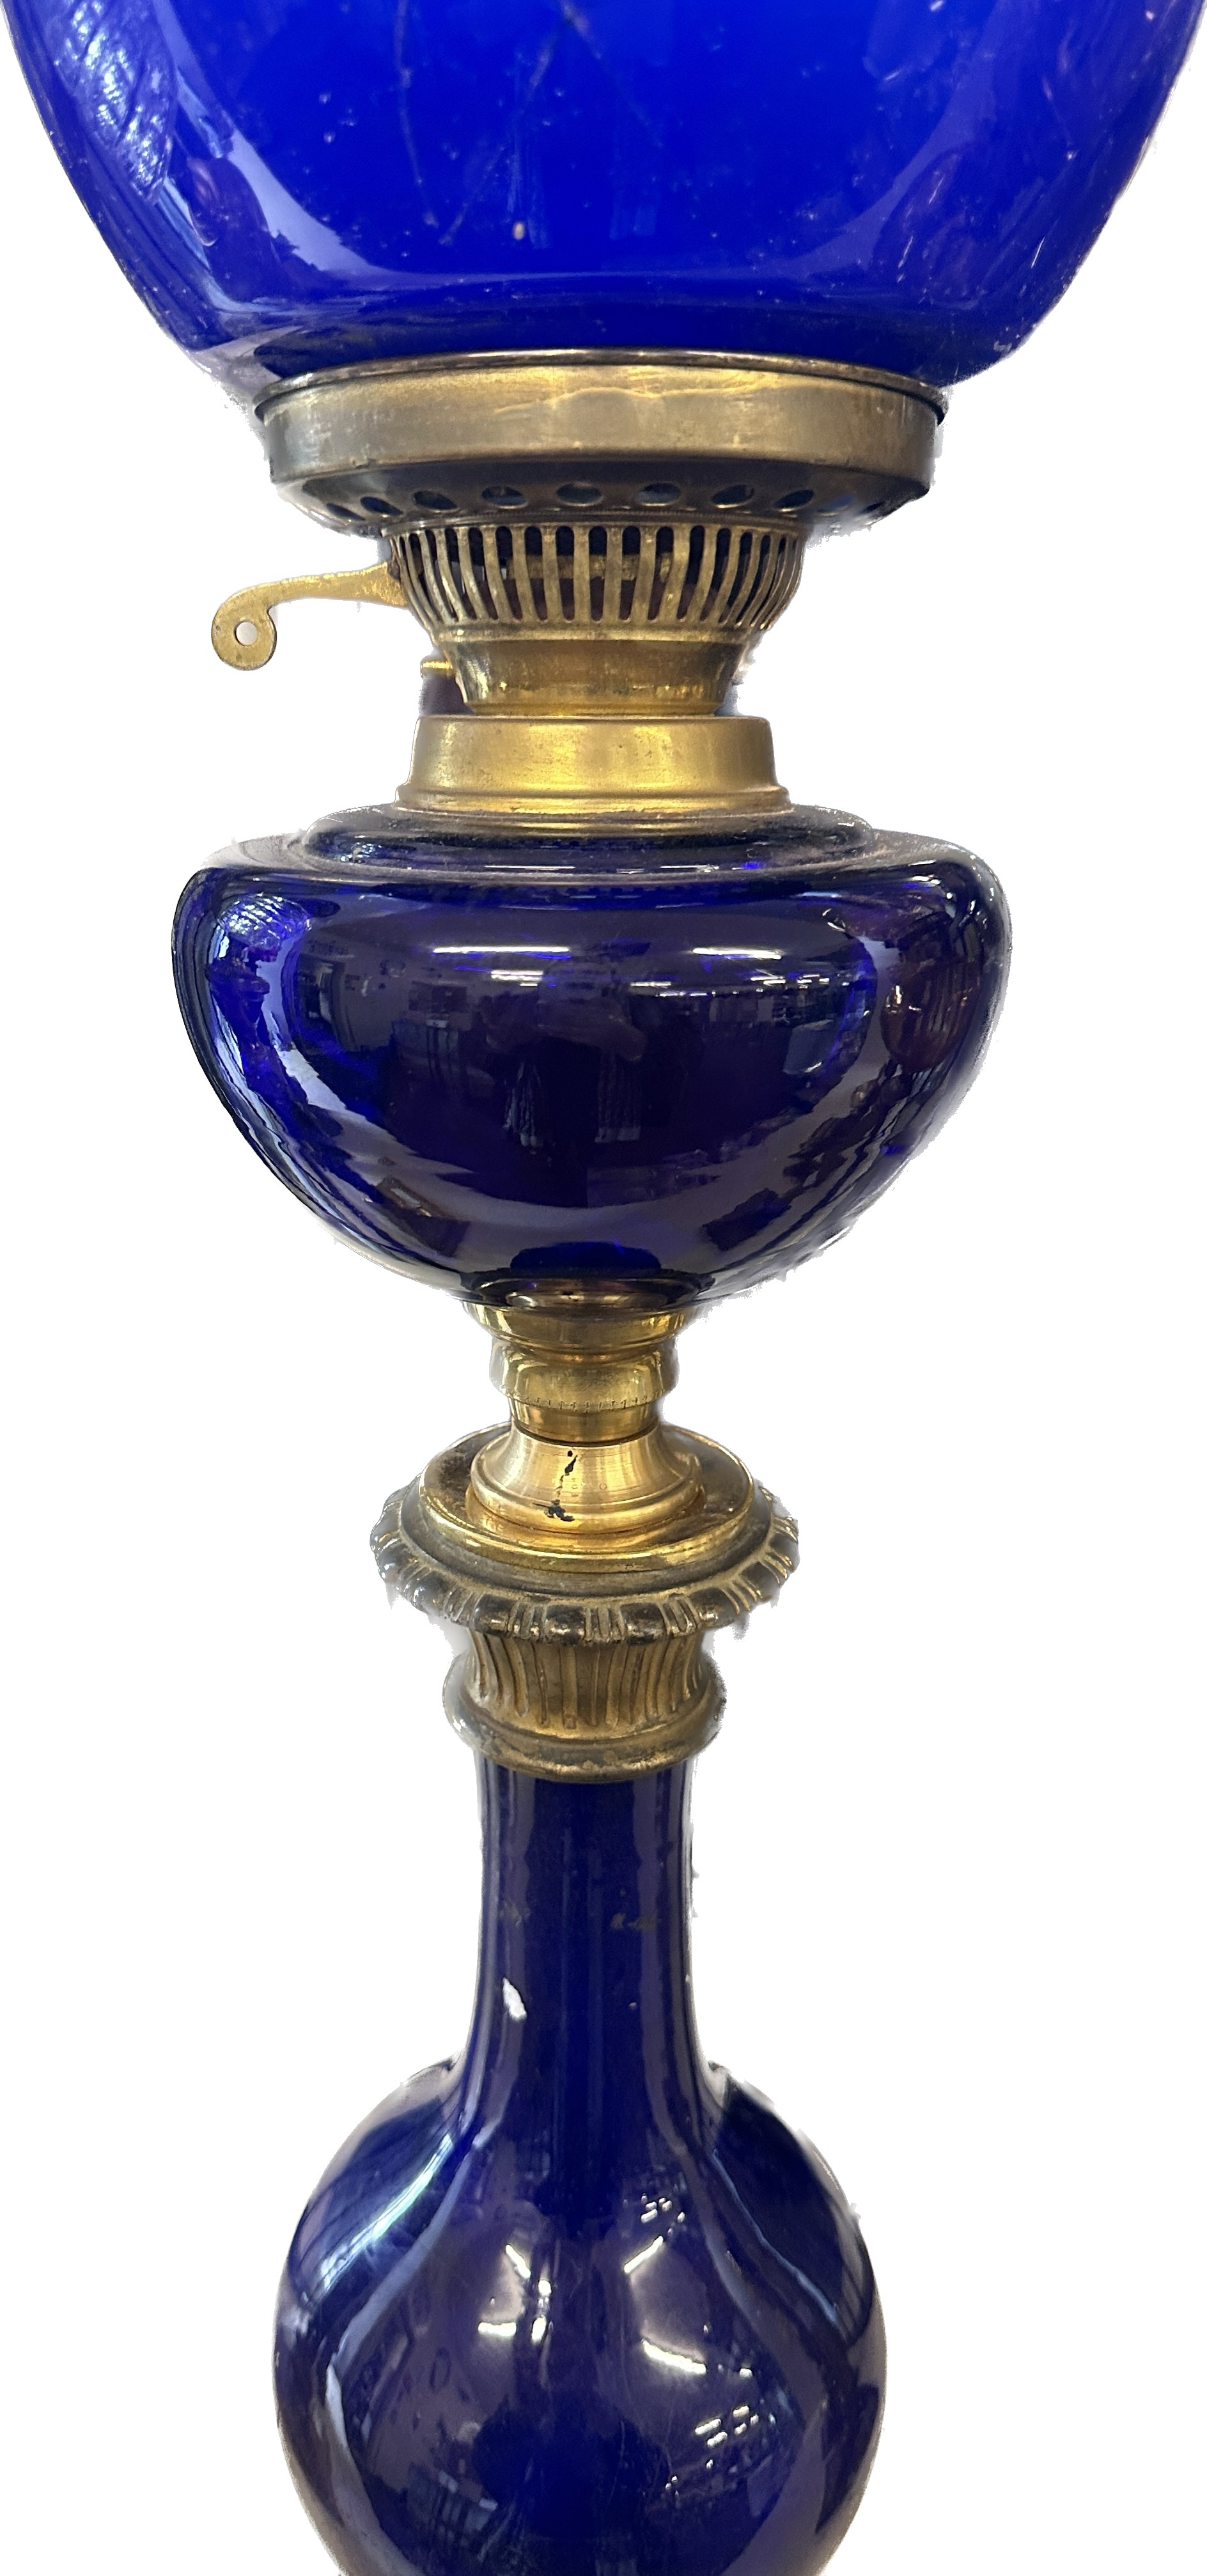 Antique blue glass brass based oil lamp complete with funnel and shade - Image 3 of 5